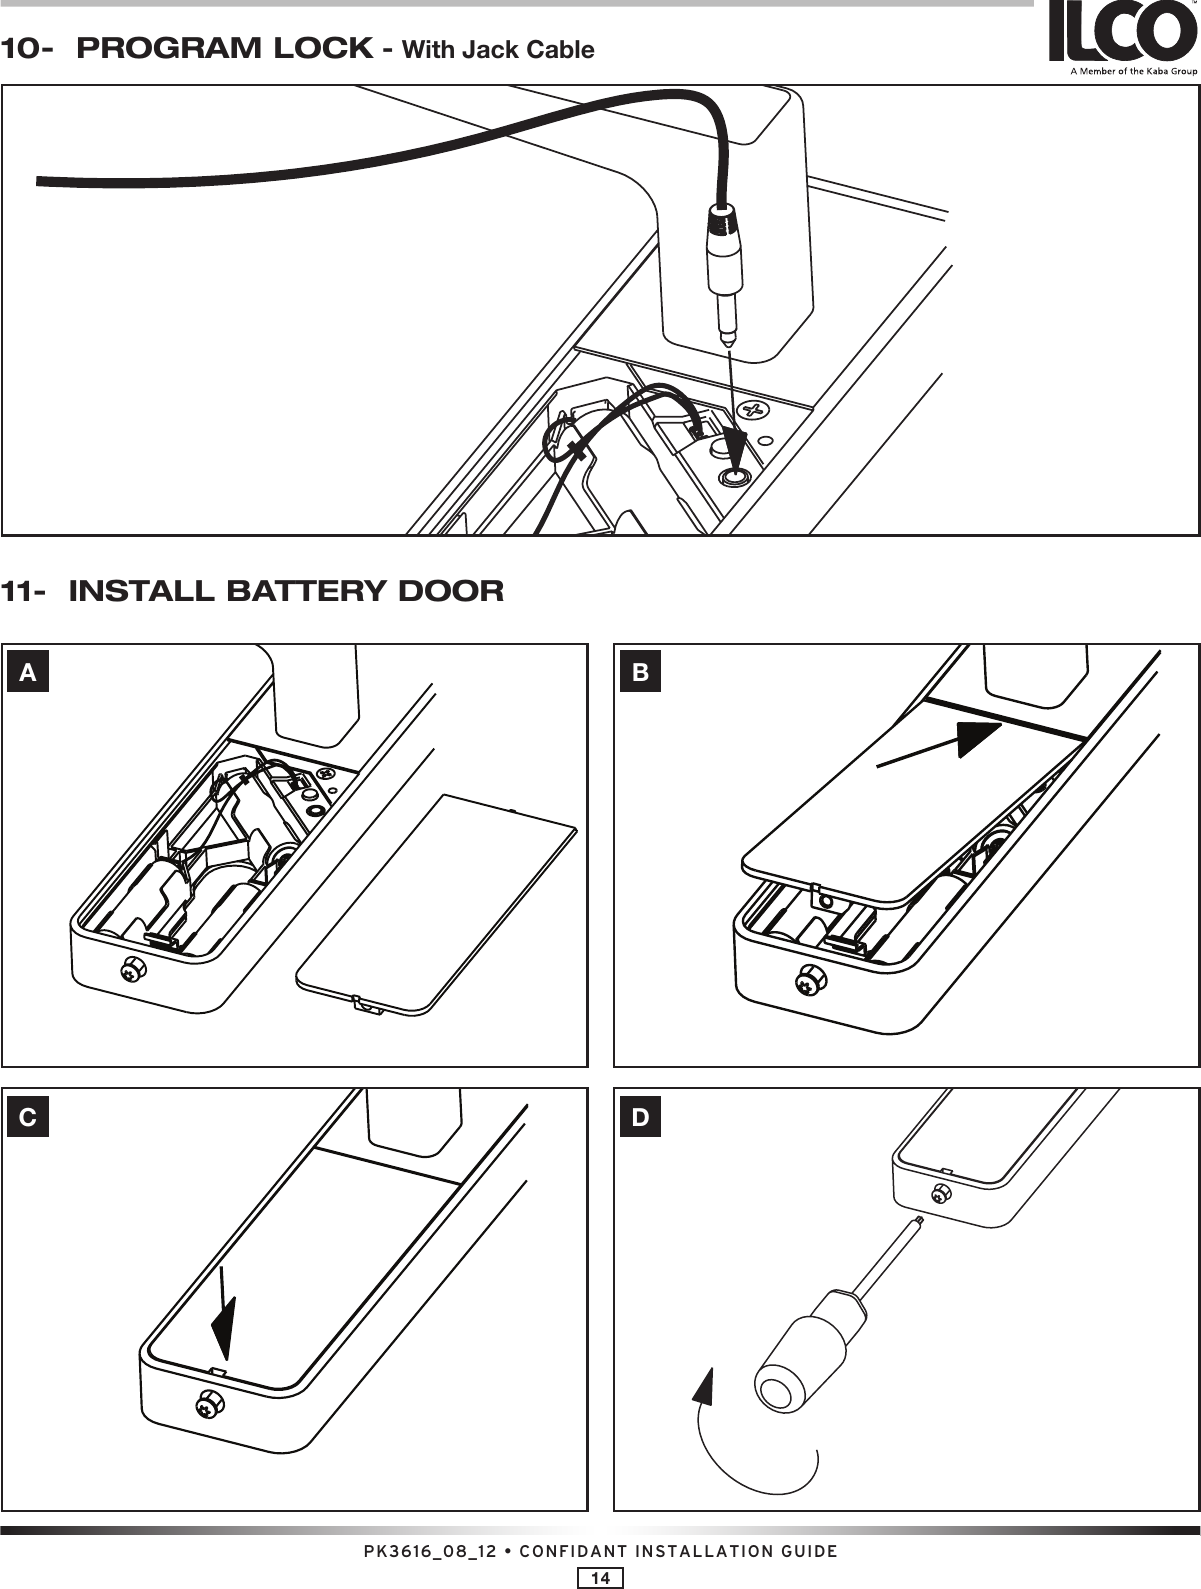 PK3616_08_12 • CONFIDANT INSTALLATION GUIDE1411-  INSTALL BATTERY DOORACBD10-  PROGRAM LOCK - With Jack Cable